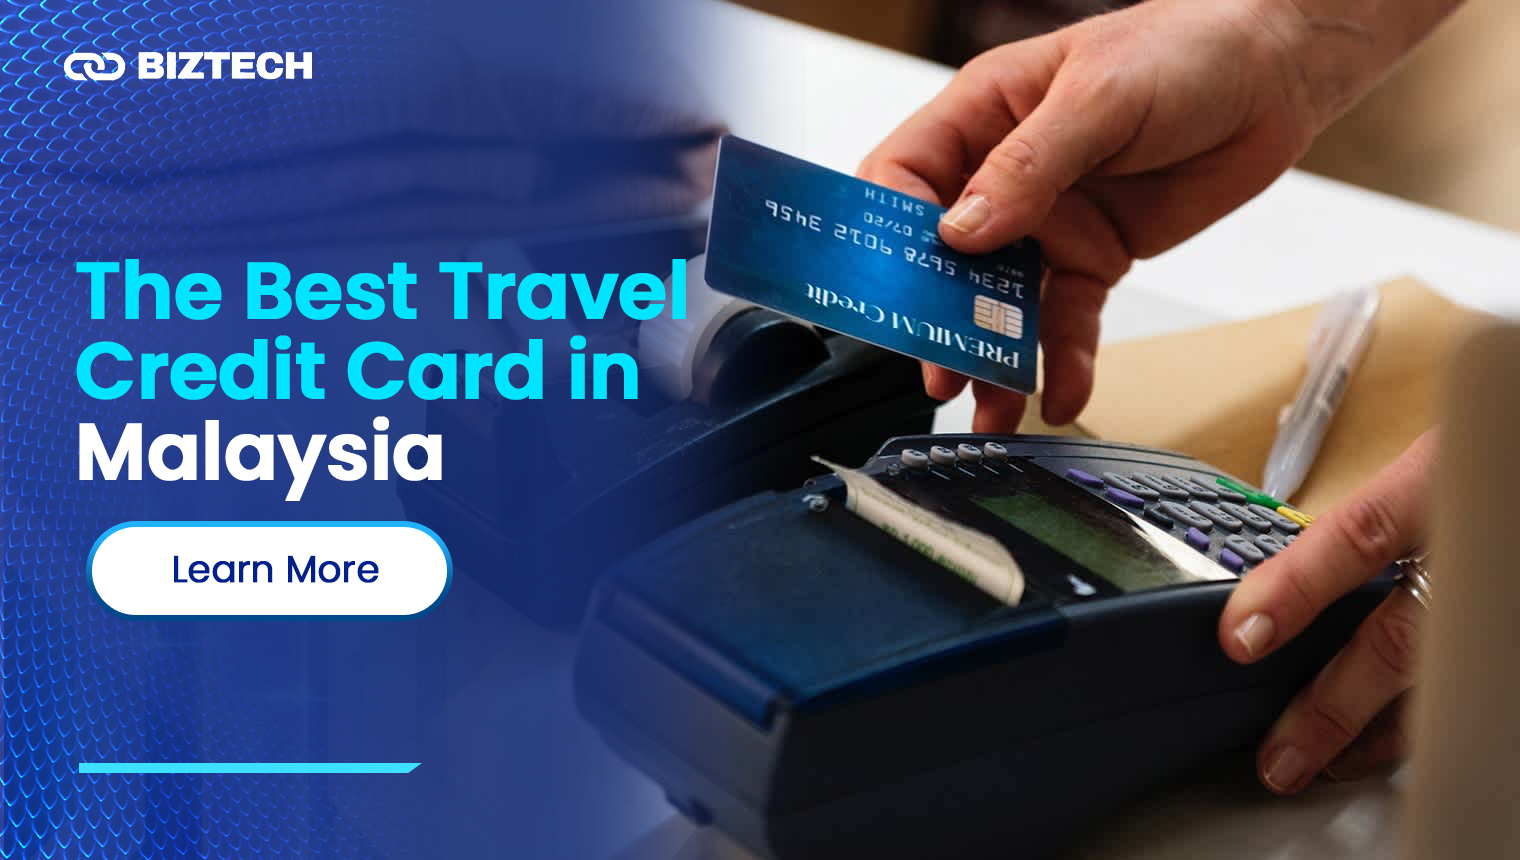 The Best Travel Credit Cards in Malaysia